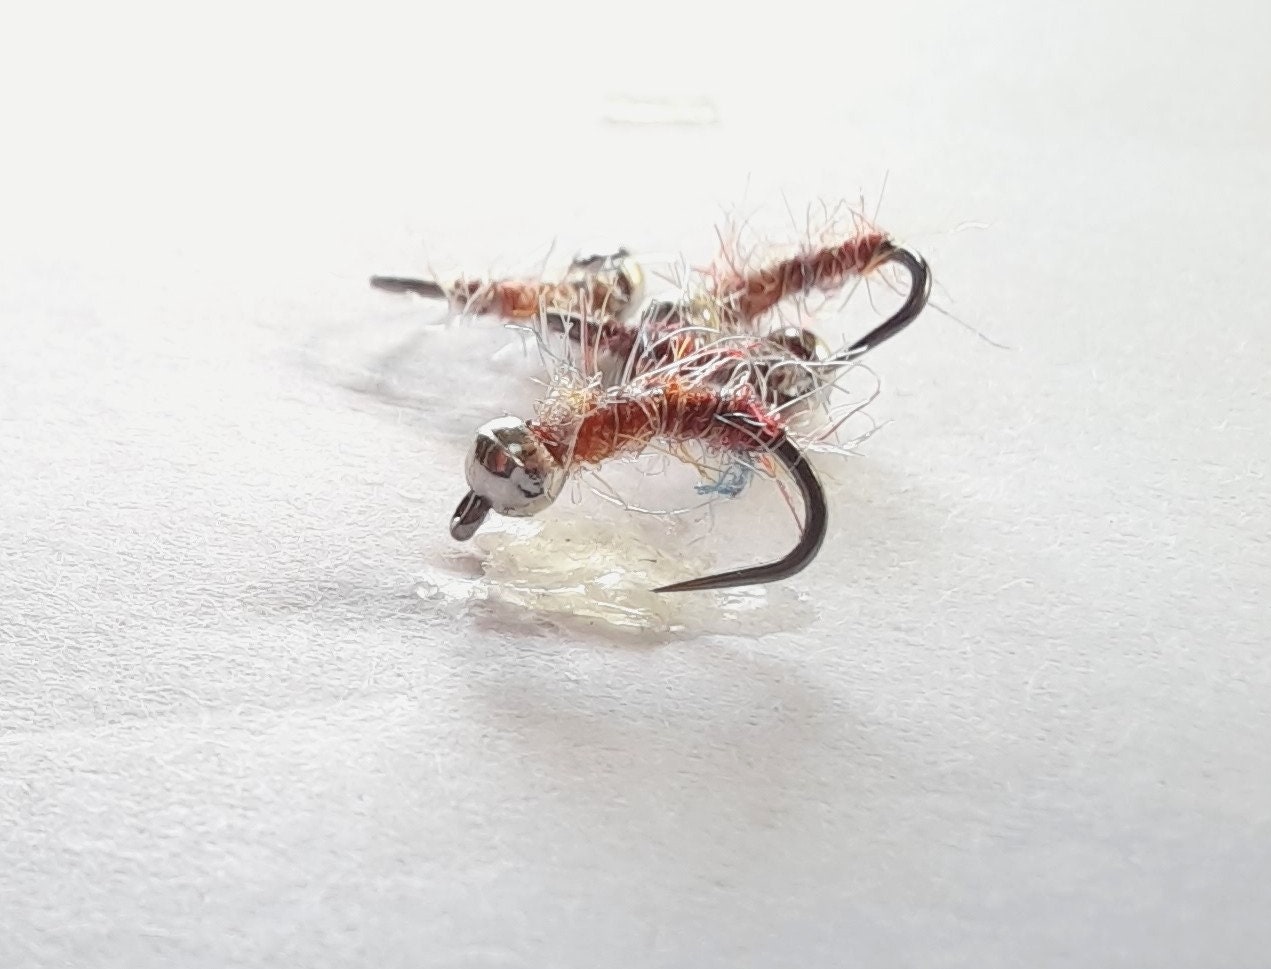 4 - Tungsten Rainbow Sowbug - Barbless Scuds. Tailwater Trout Flies. Fly  Fishing Flies.